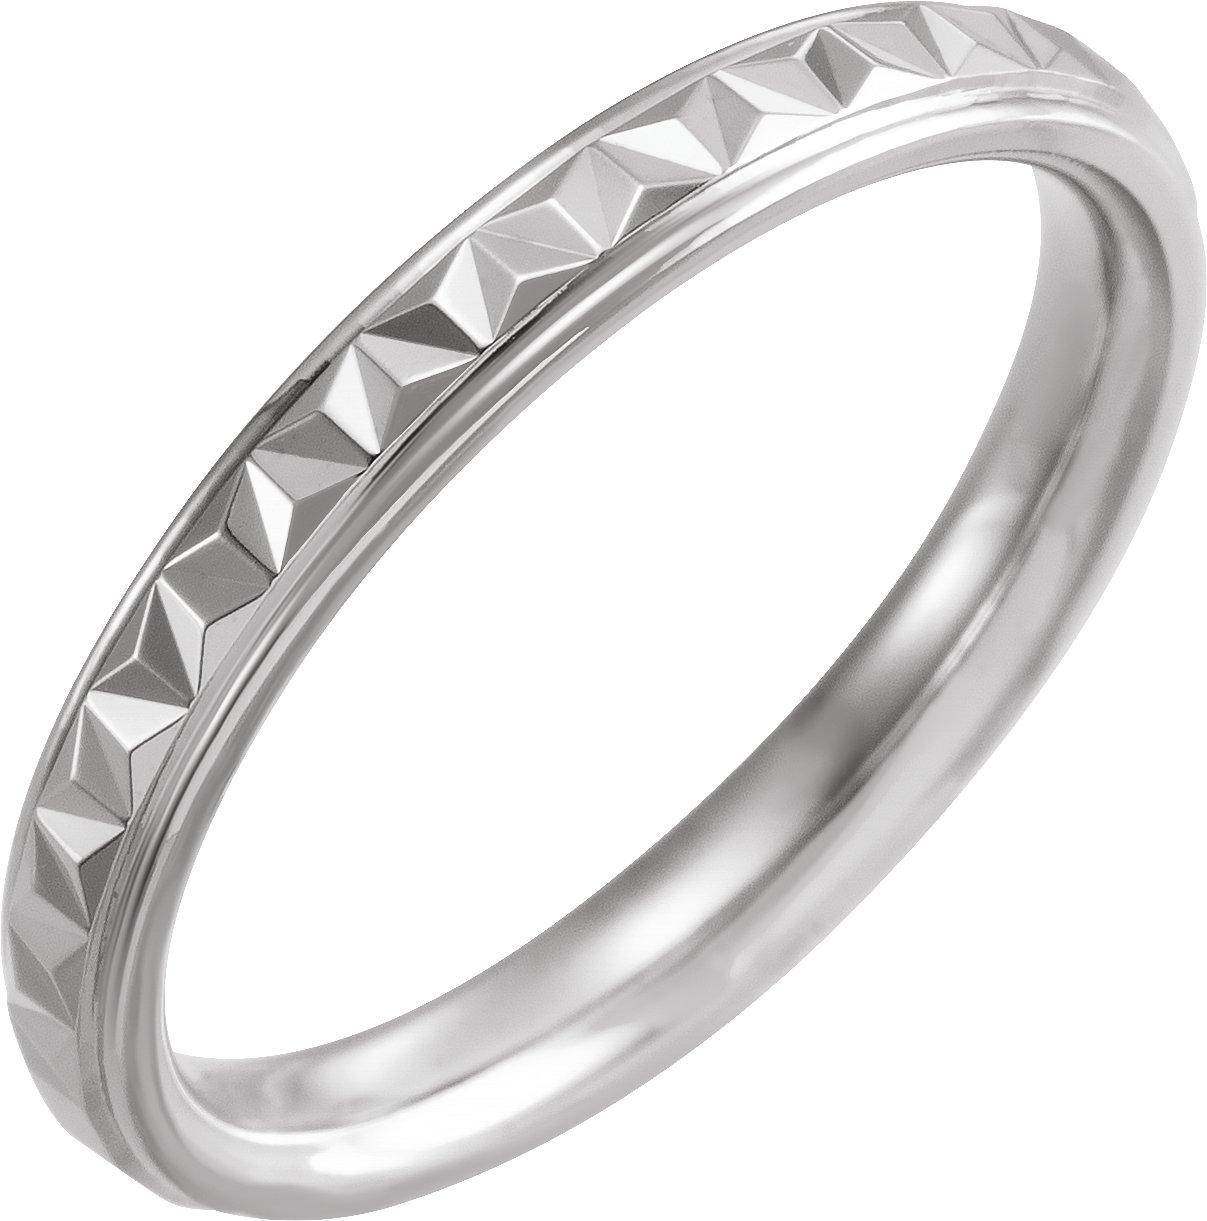 Continuum Sterling Silver 3 mm Geometric Band with Polished Finish Size 8